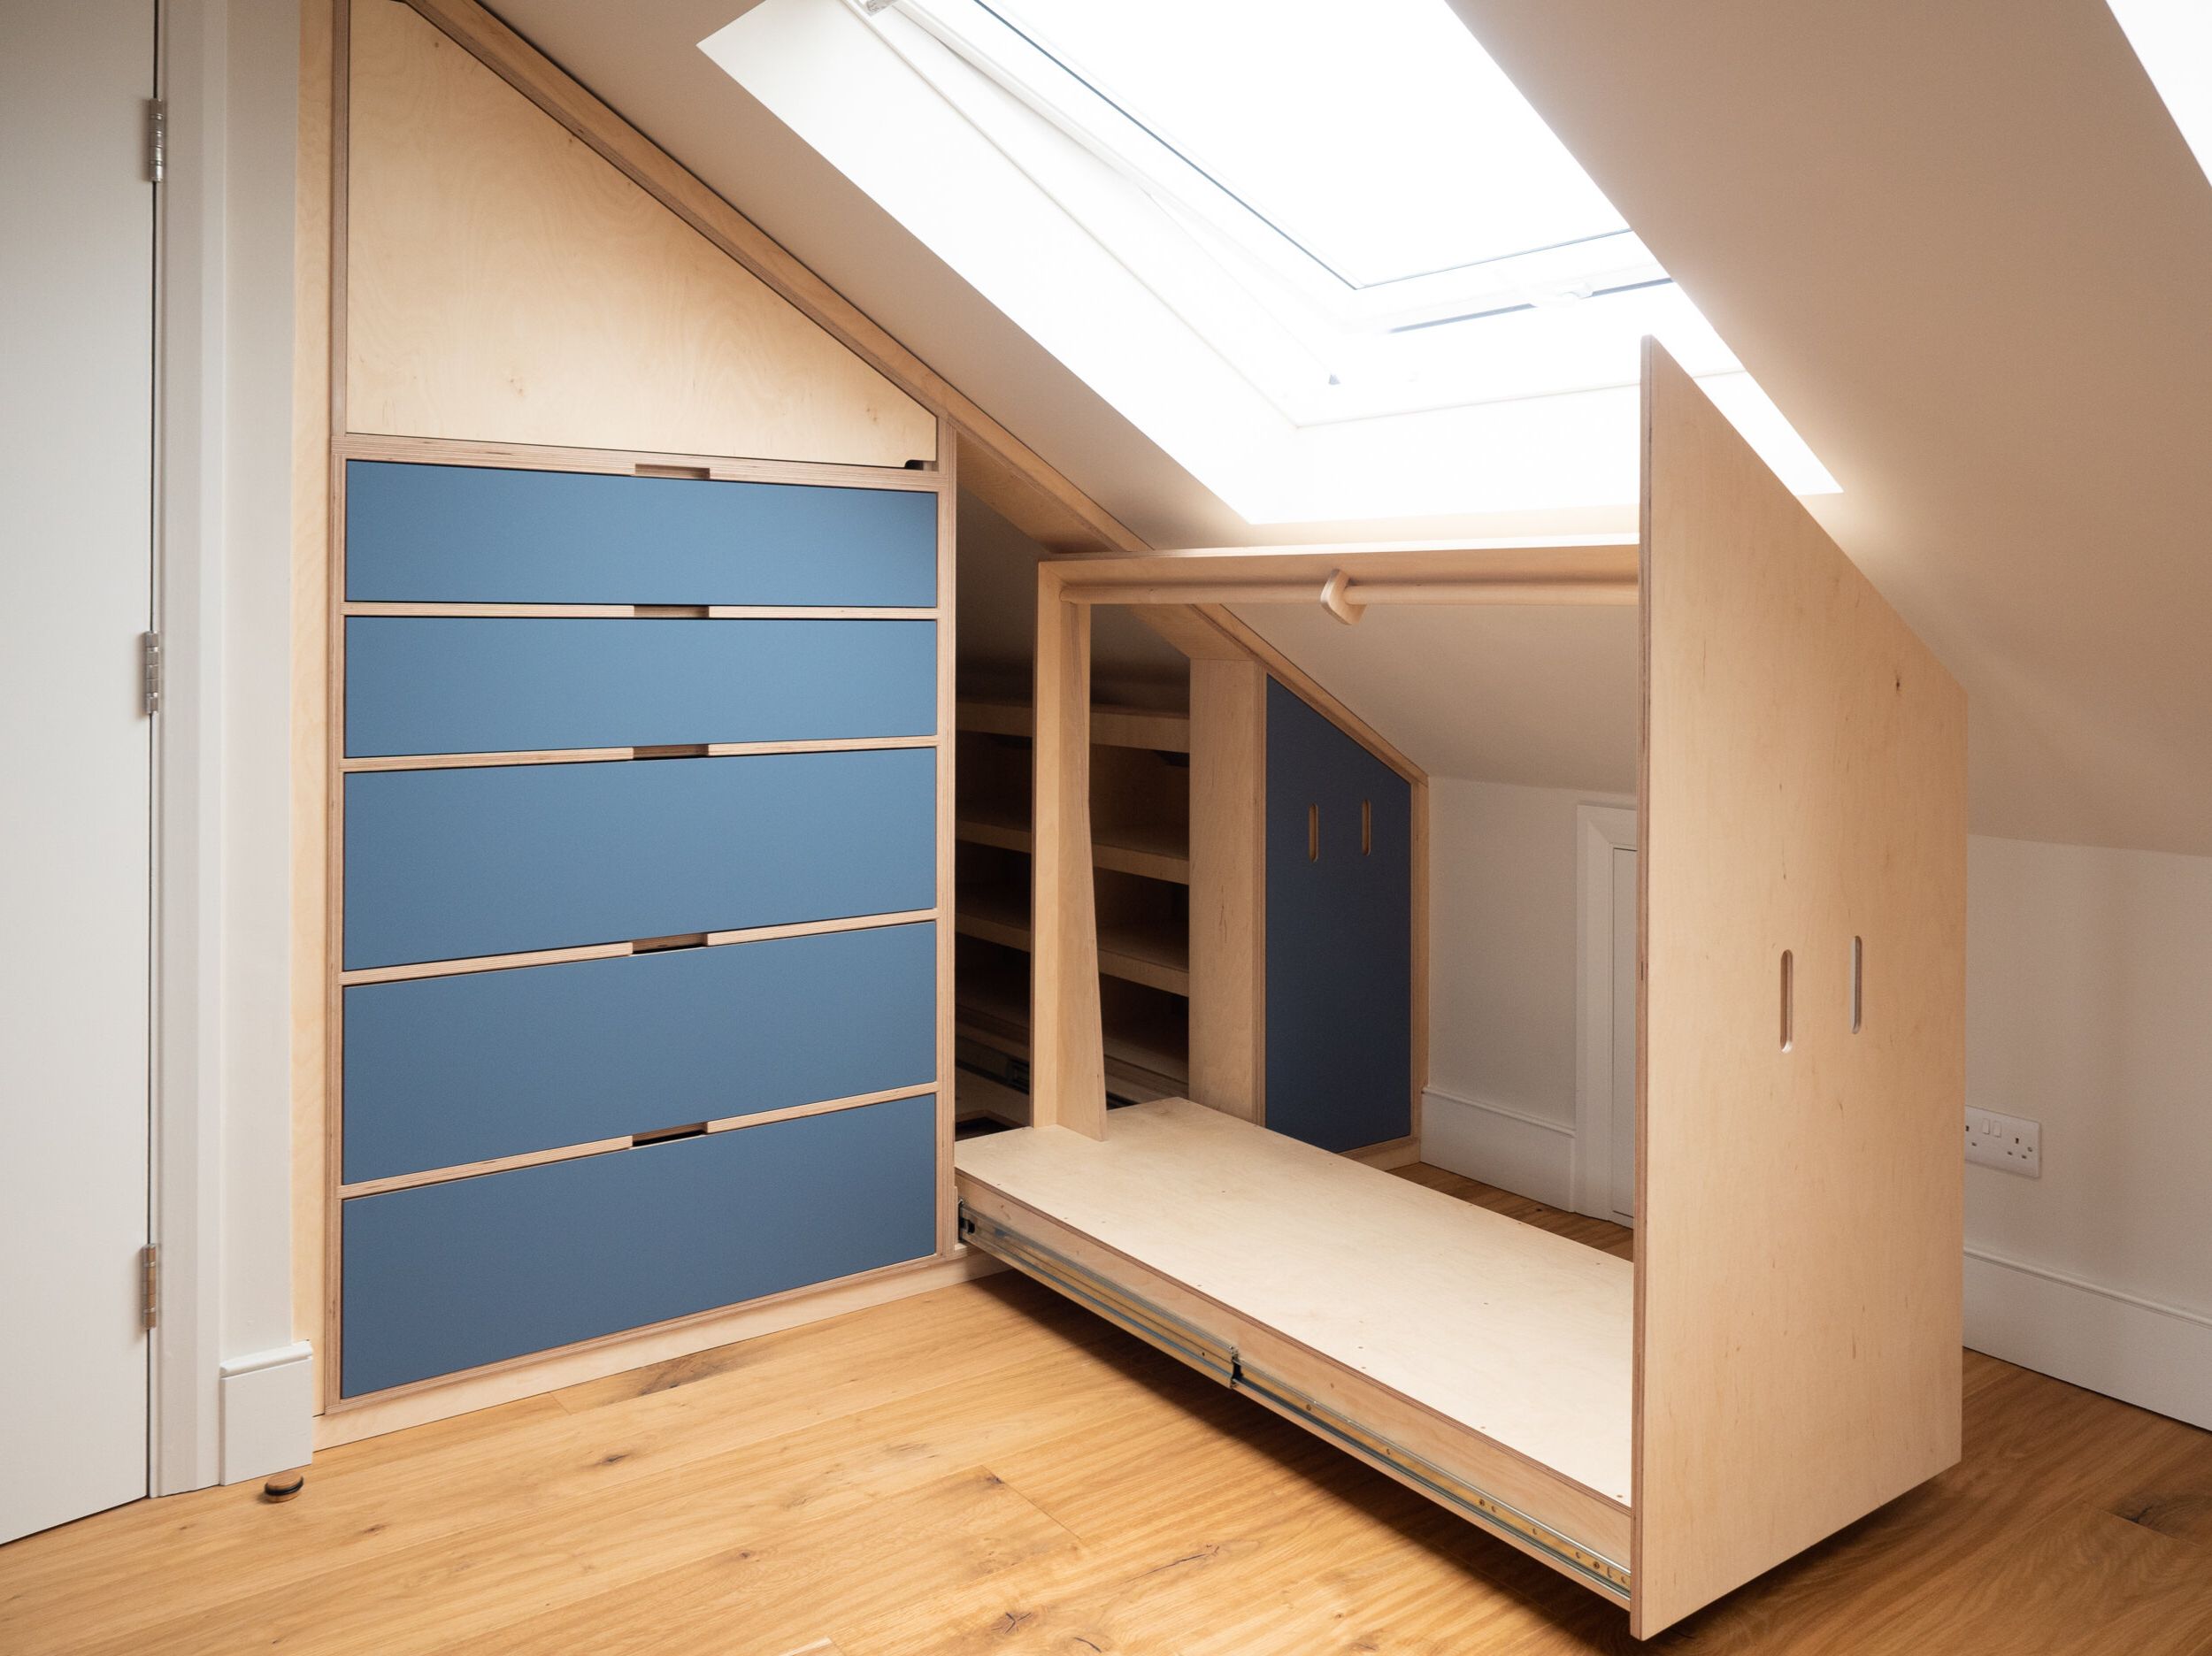 Plywood Eaves Wardrobe (with The Giant Drawers Of Dreams And Fenix Laminate  Fronts) — The Modern Carpenter Inside Heavy Duty Wardrobes (Gallery 12 of 20)